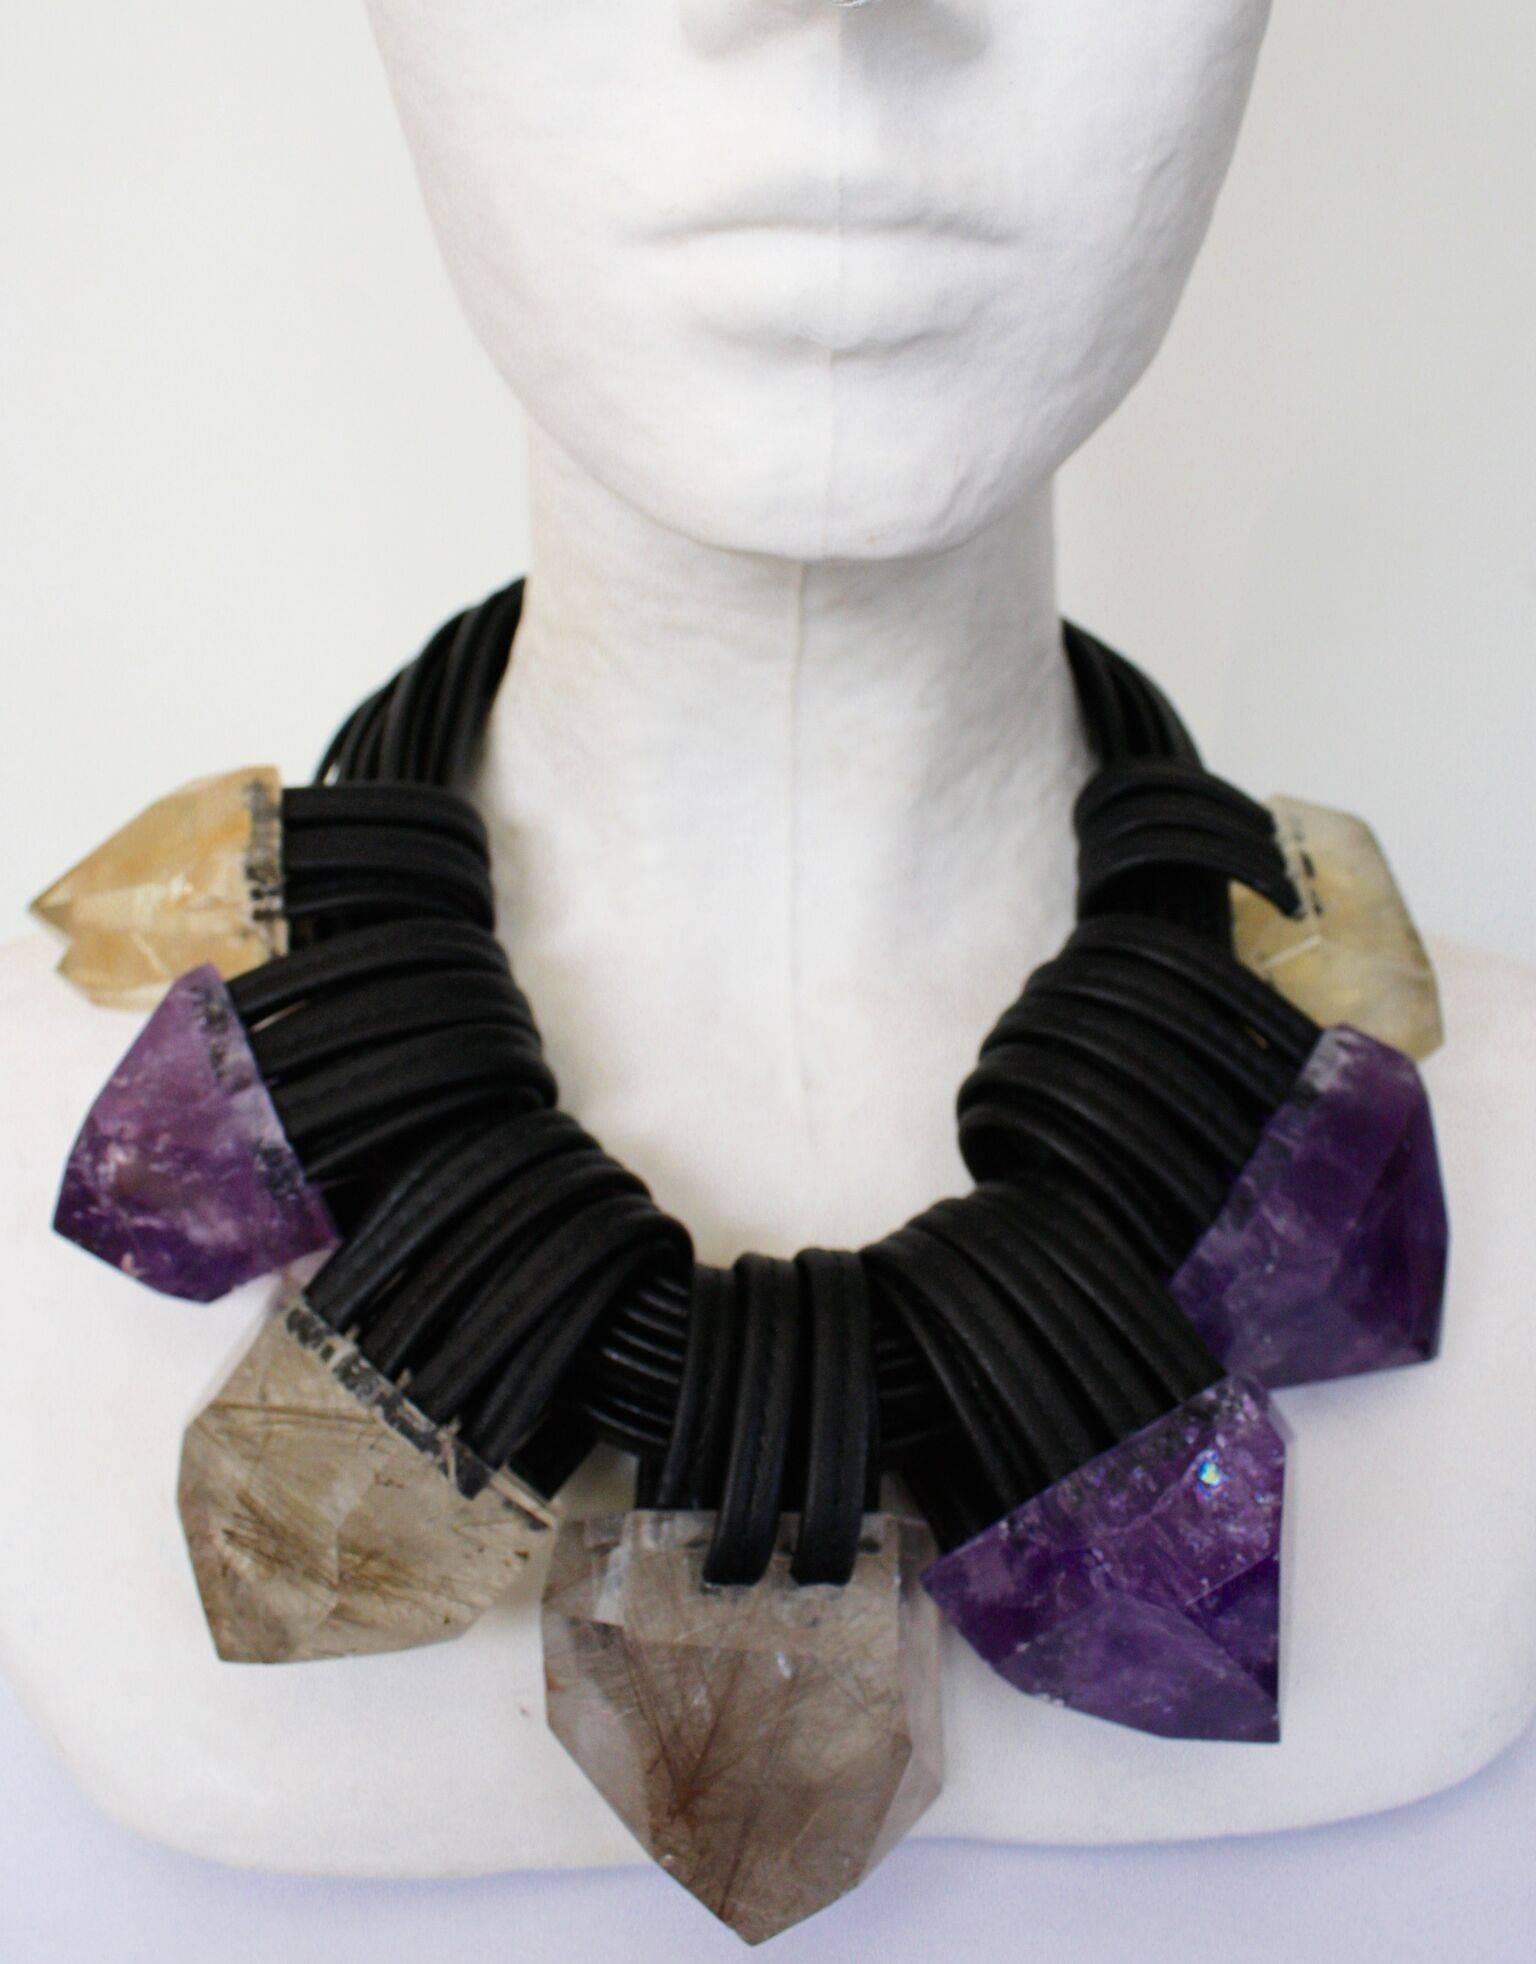 An exceptional one of a kind creation from Monies made with raw citrine, faceted citrine, amethyst, ebony and leather. 

17